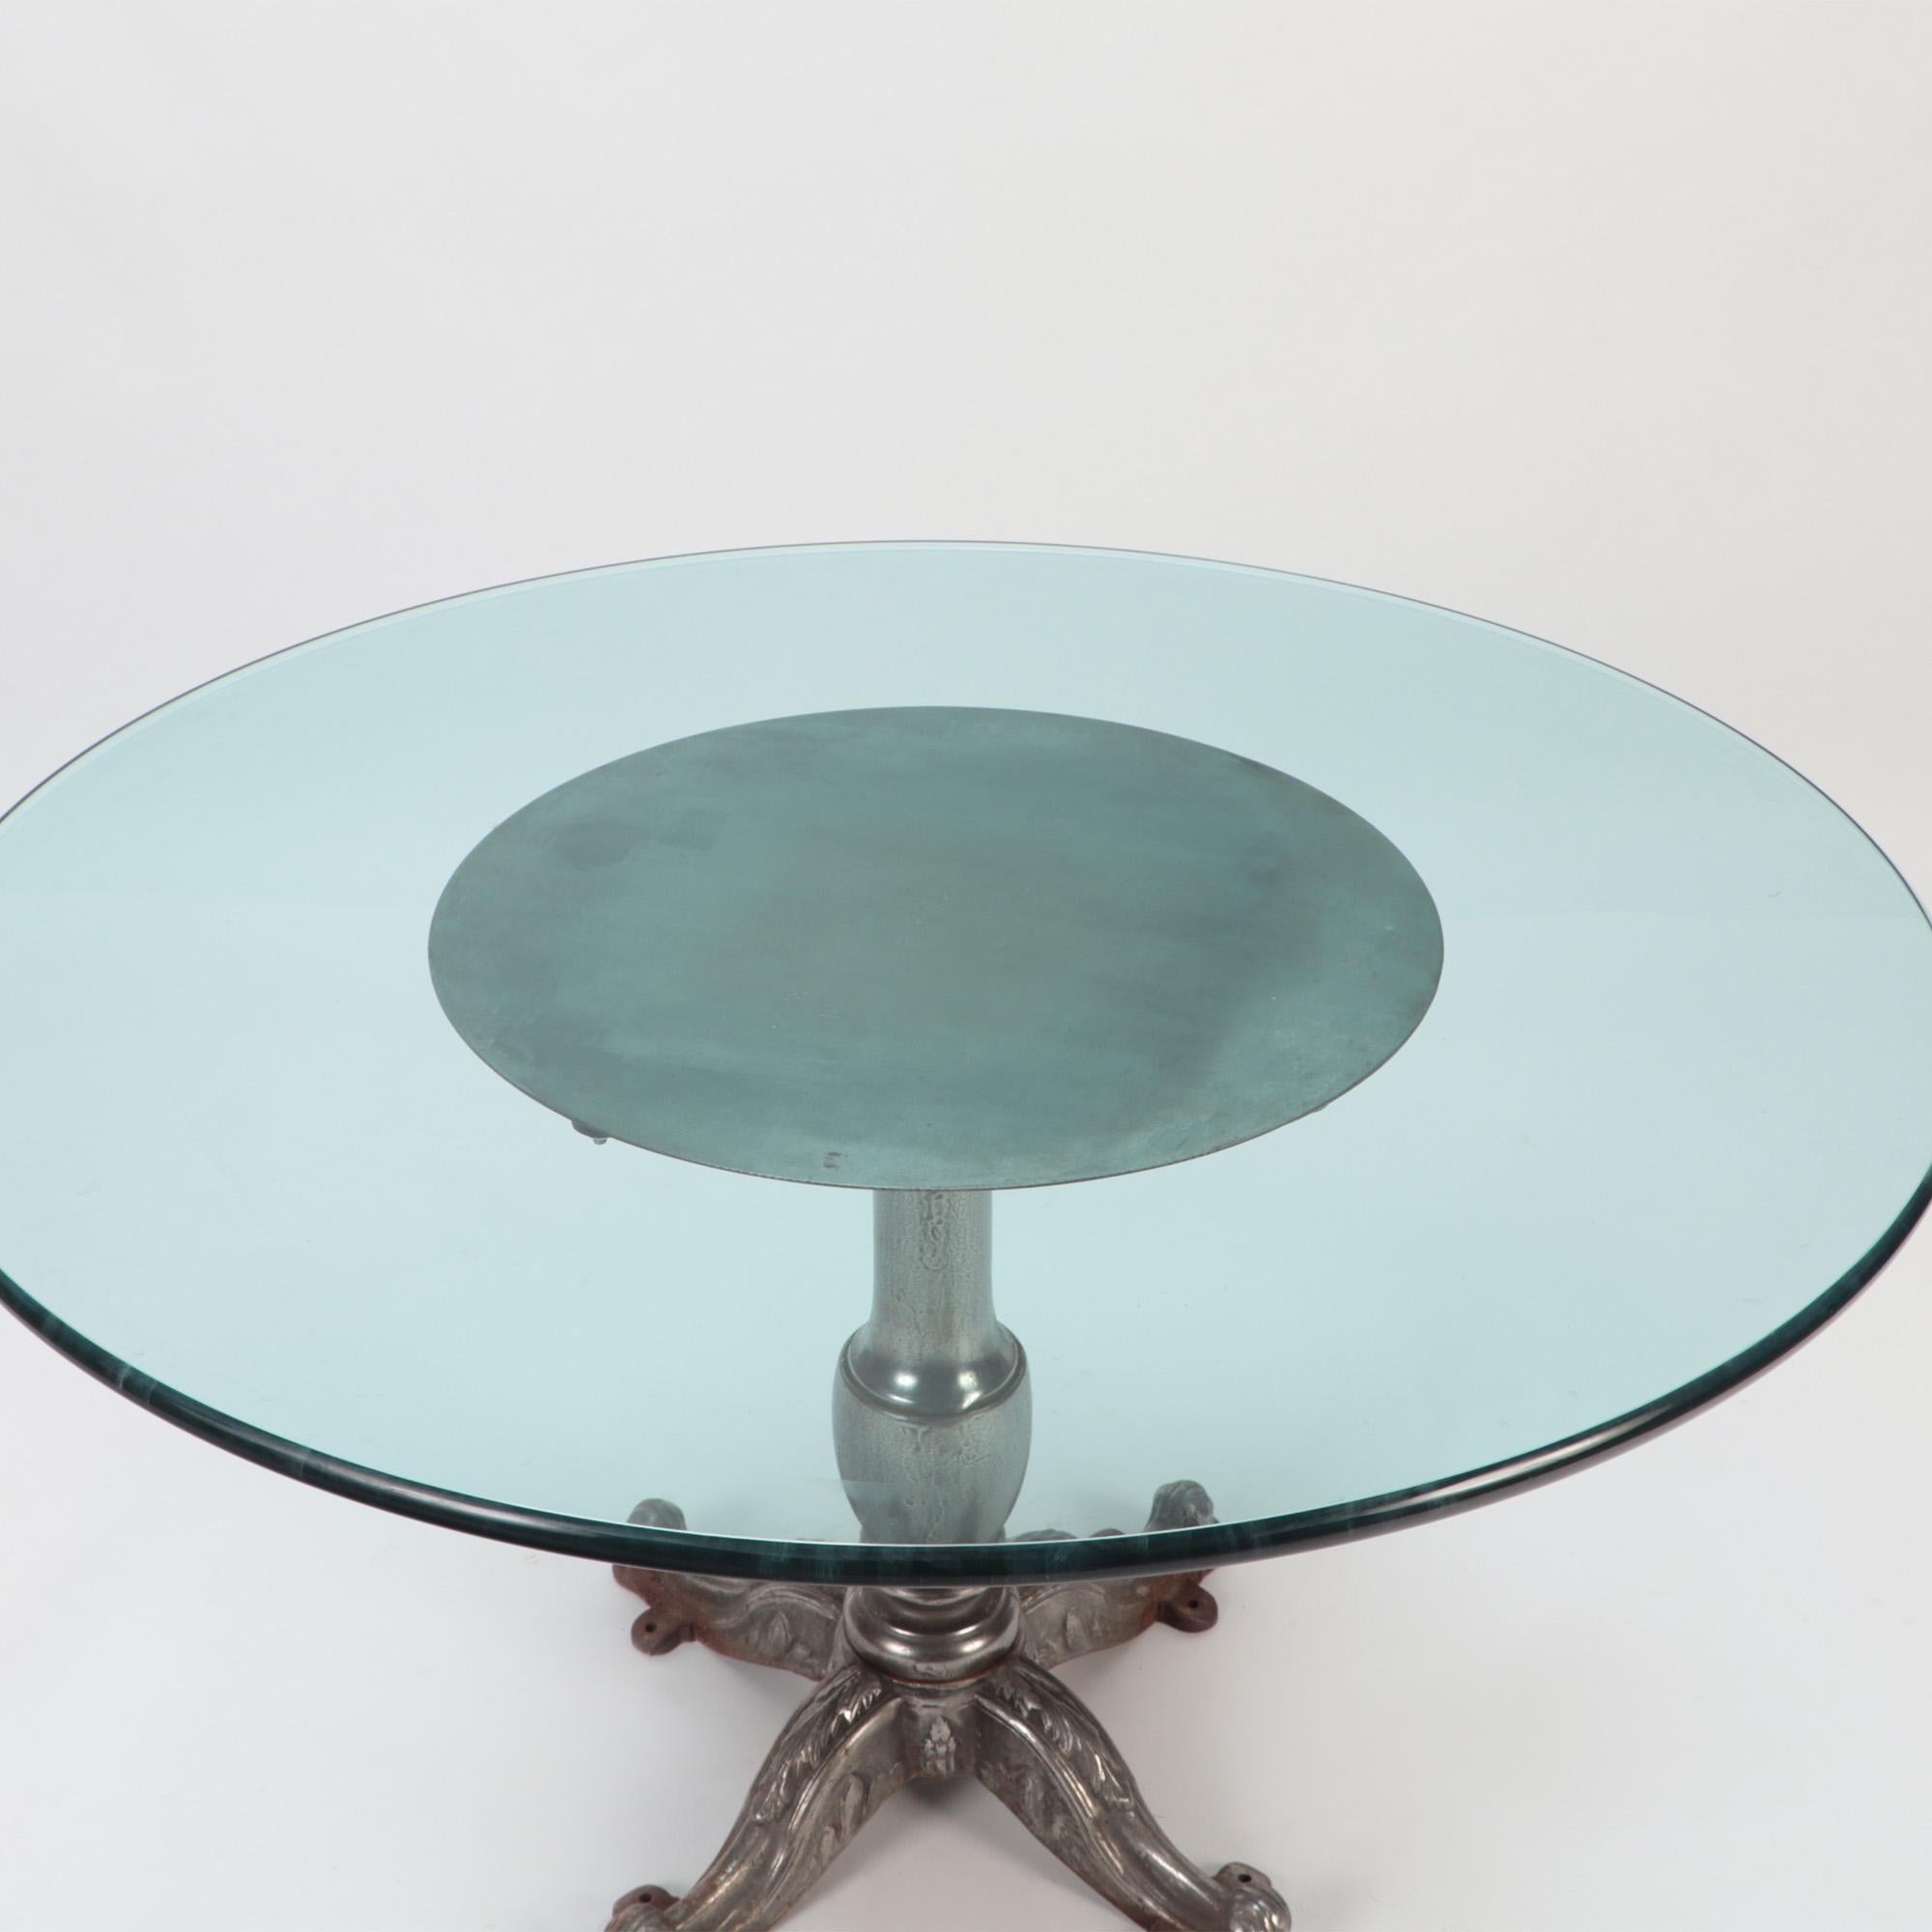 A heavy cast iron table with round glass top.